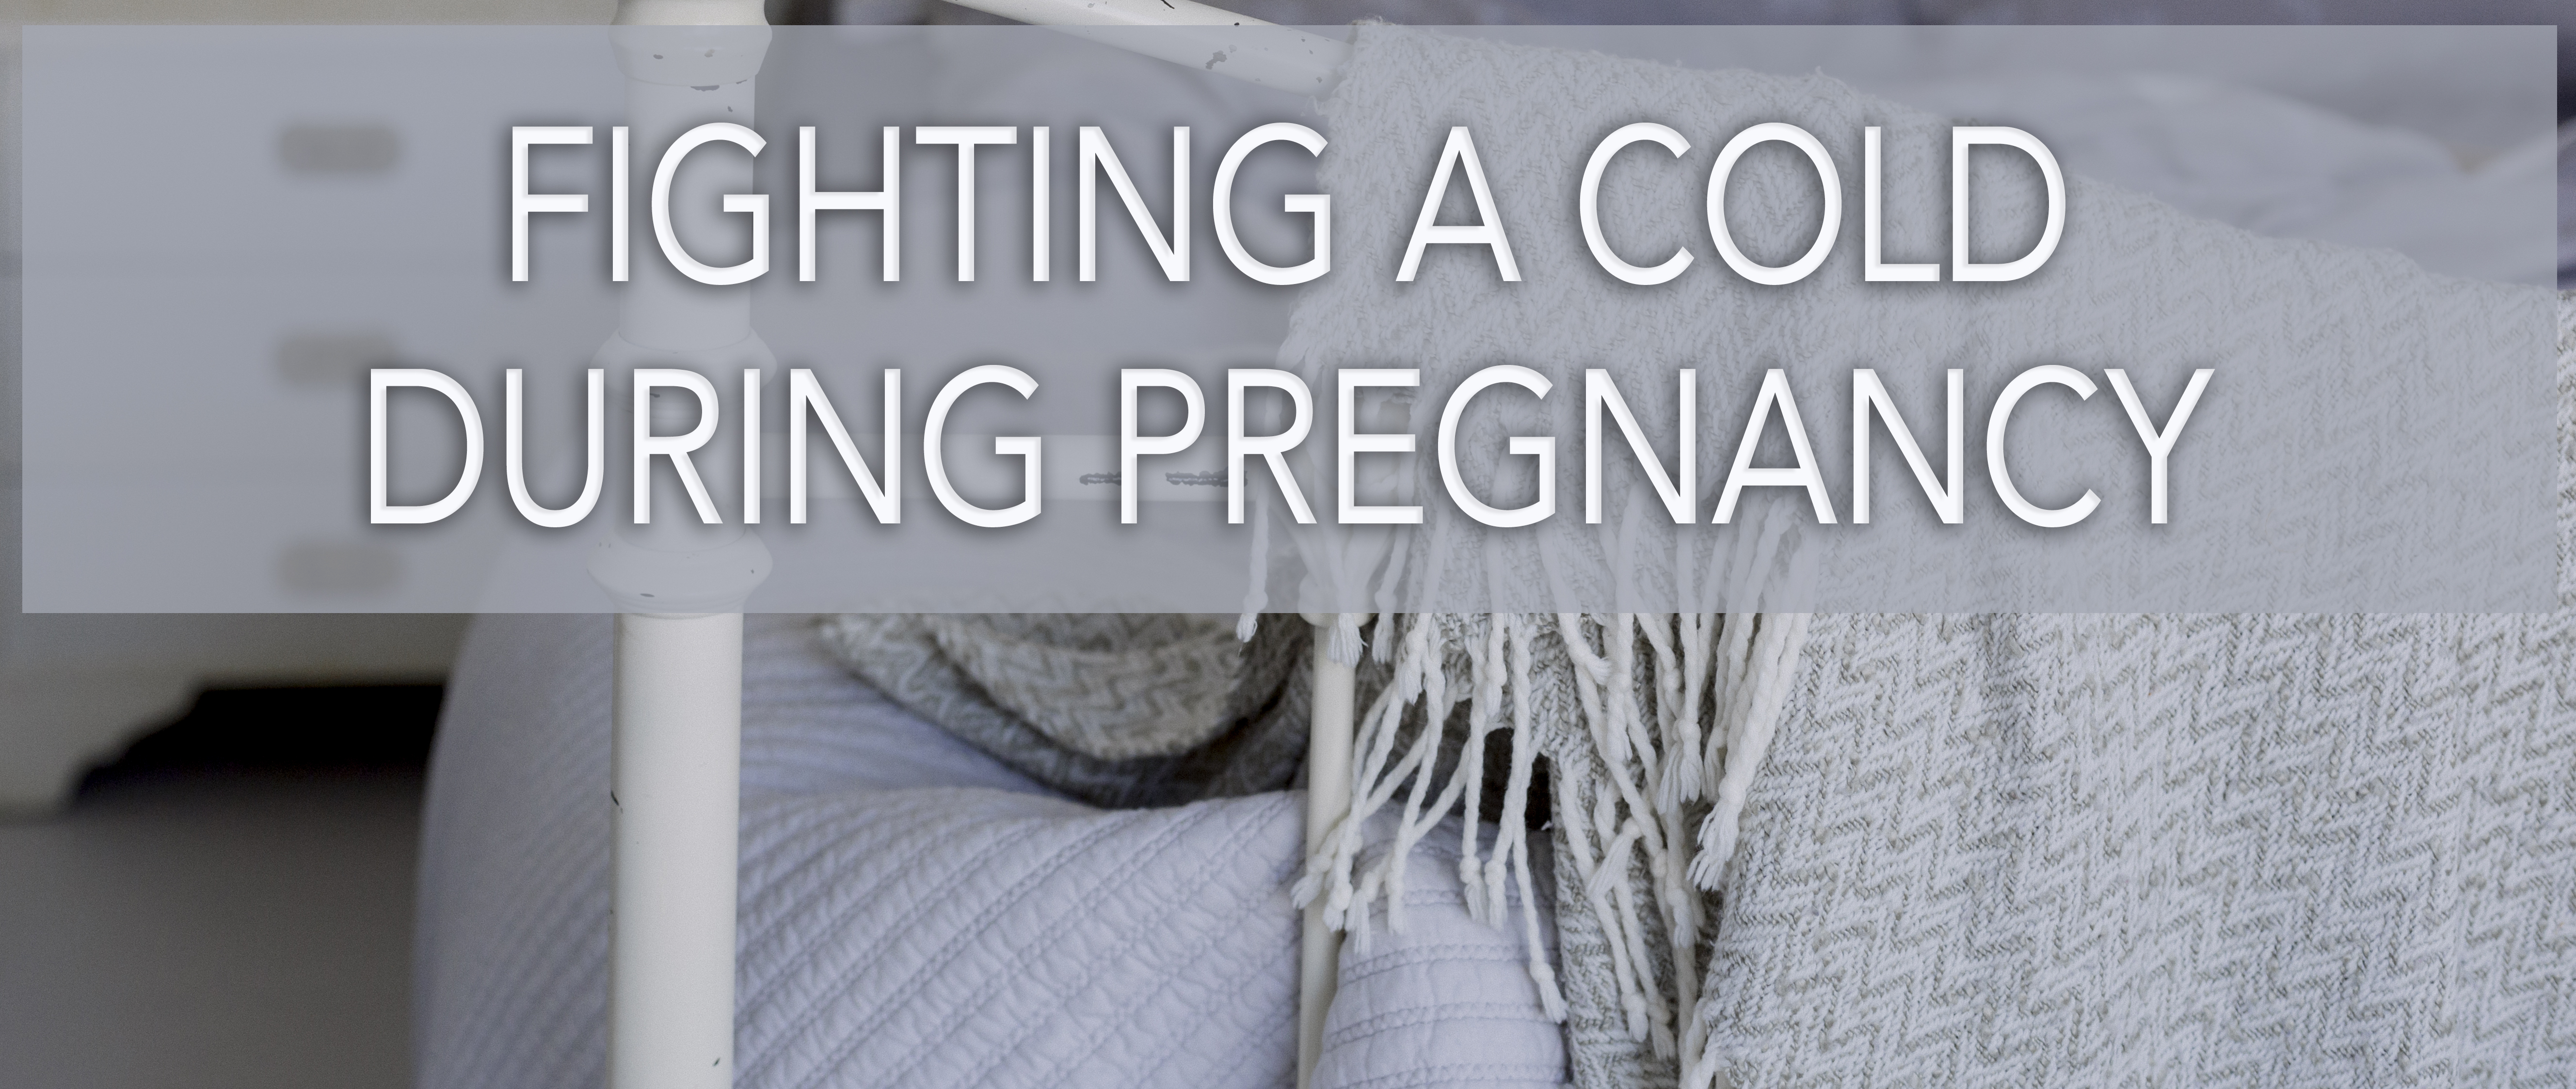 fighting a cold during pregnancy